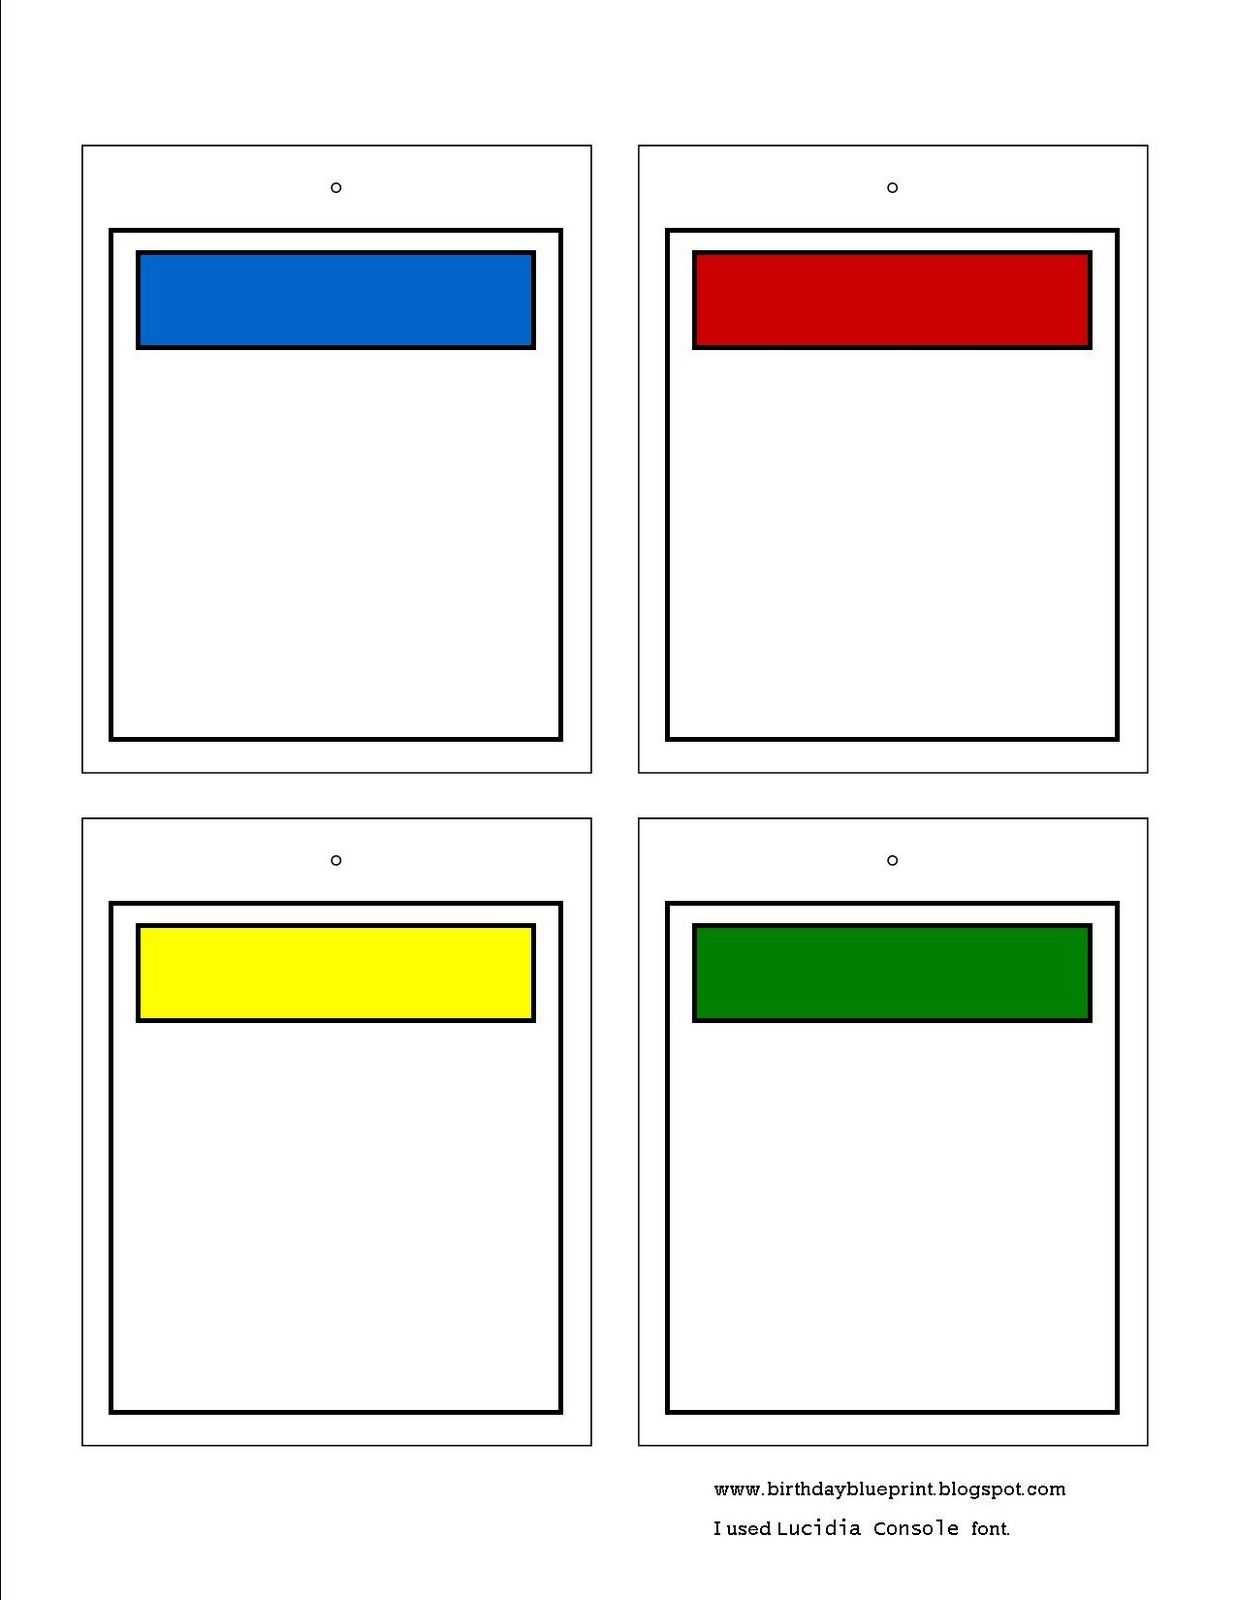 Blank Monopoly Property Cards. To Write In The Bible Memory Throughout Monopoly Property Card Template